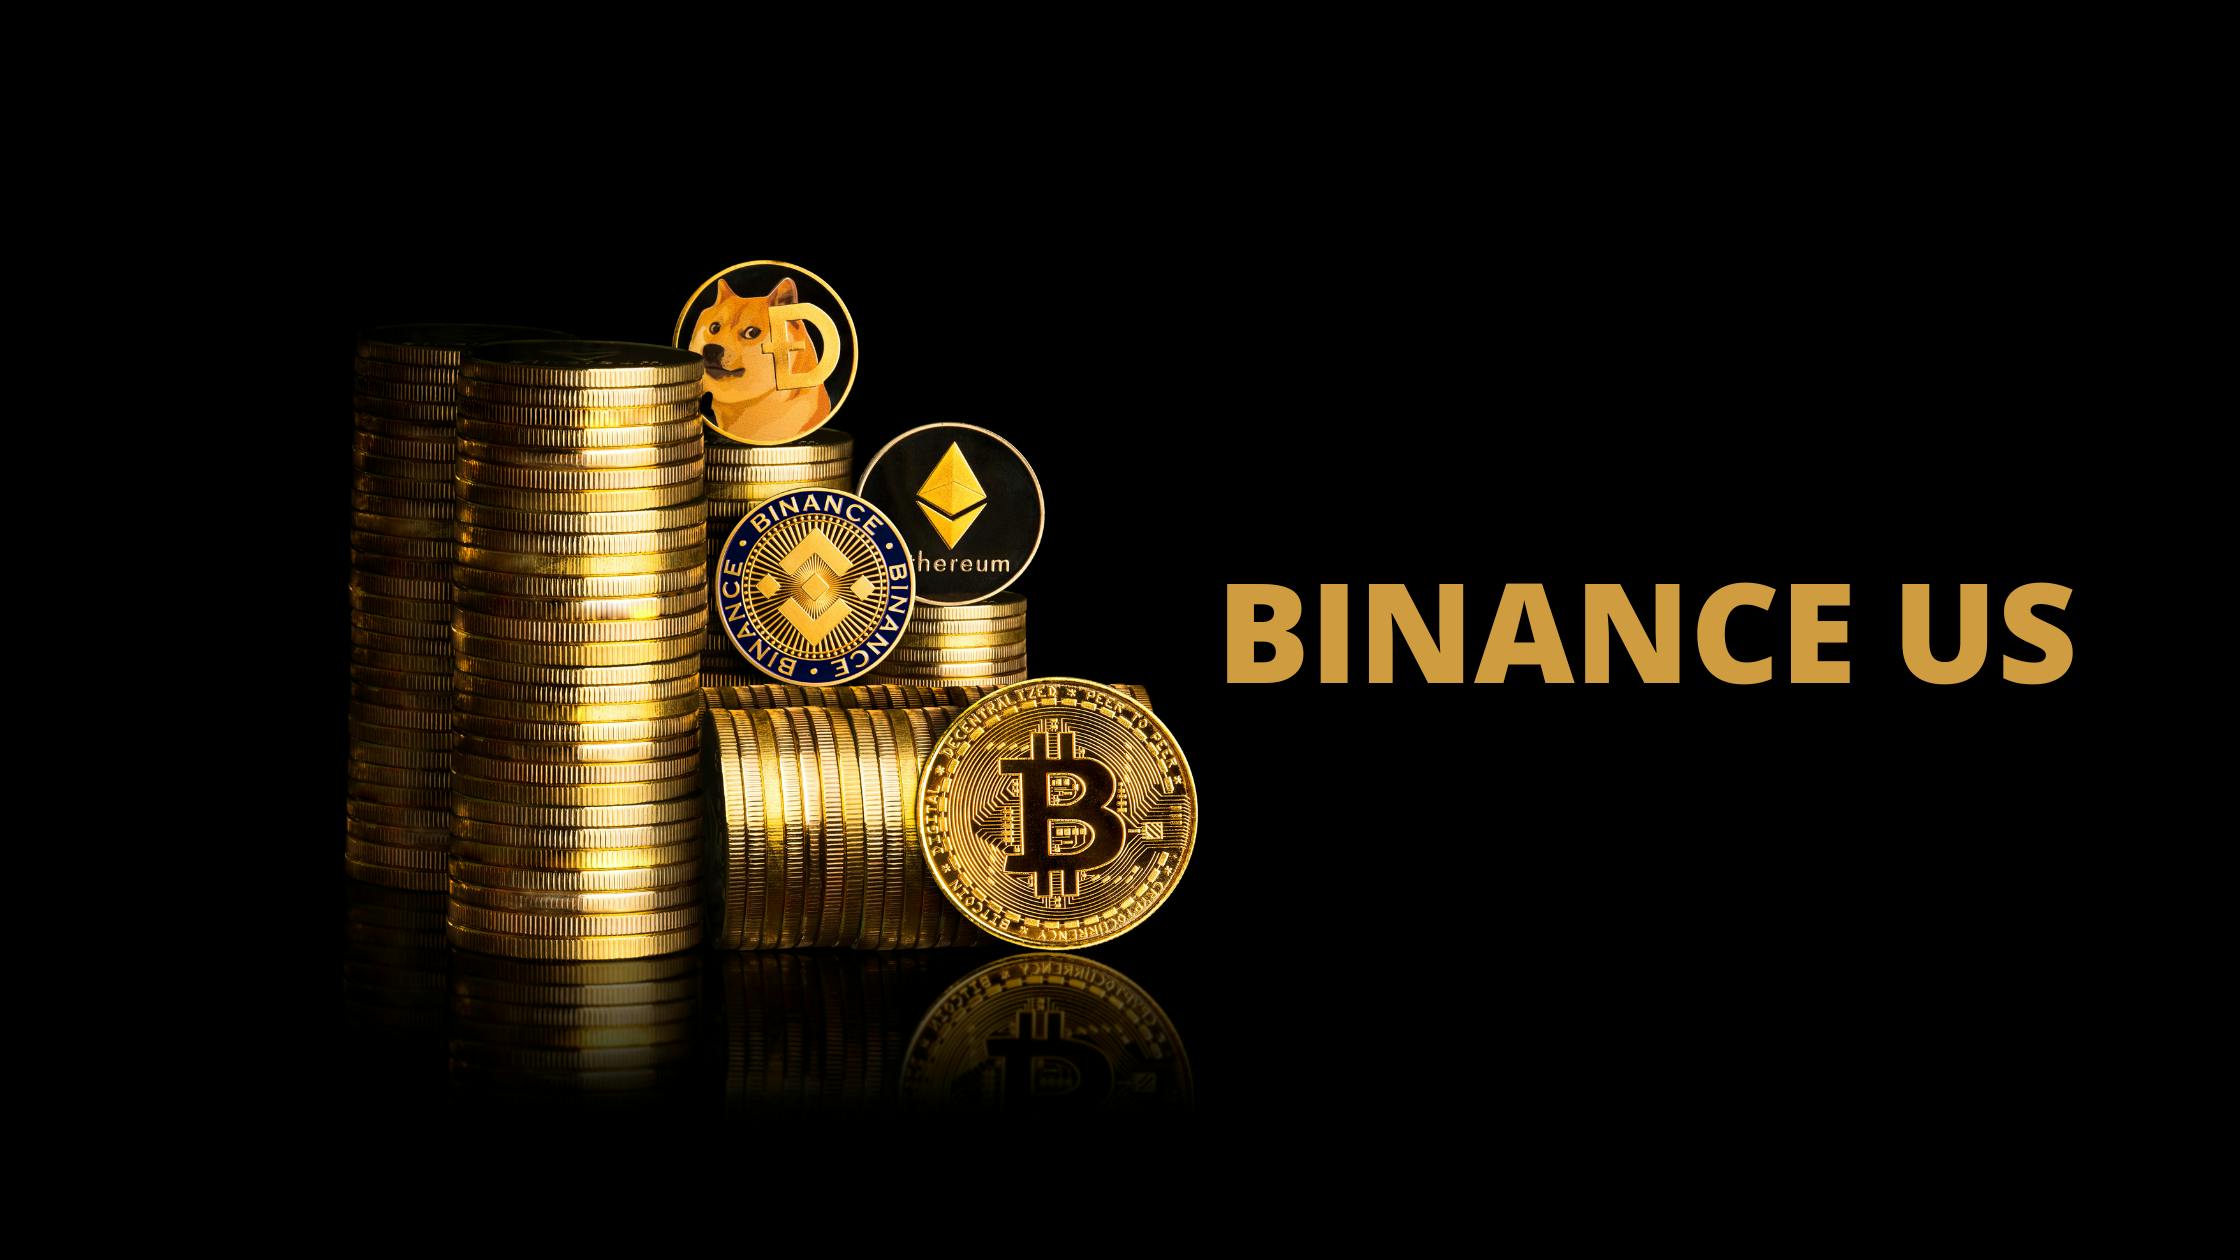 Binance US Adds Staking Services for 7 Different Crypto Assets